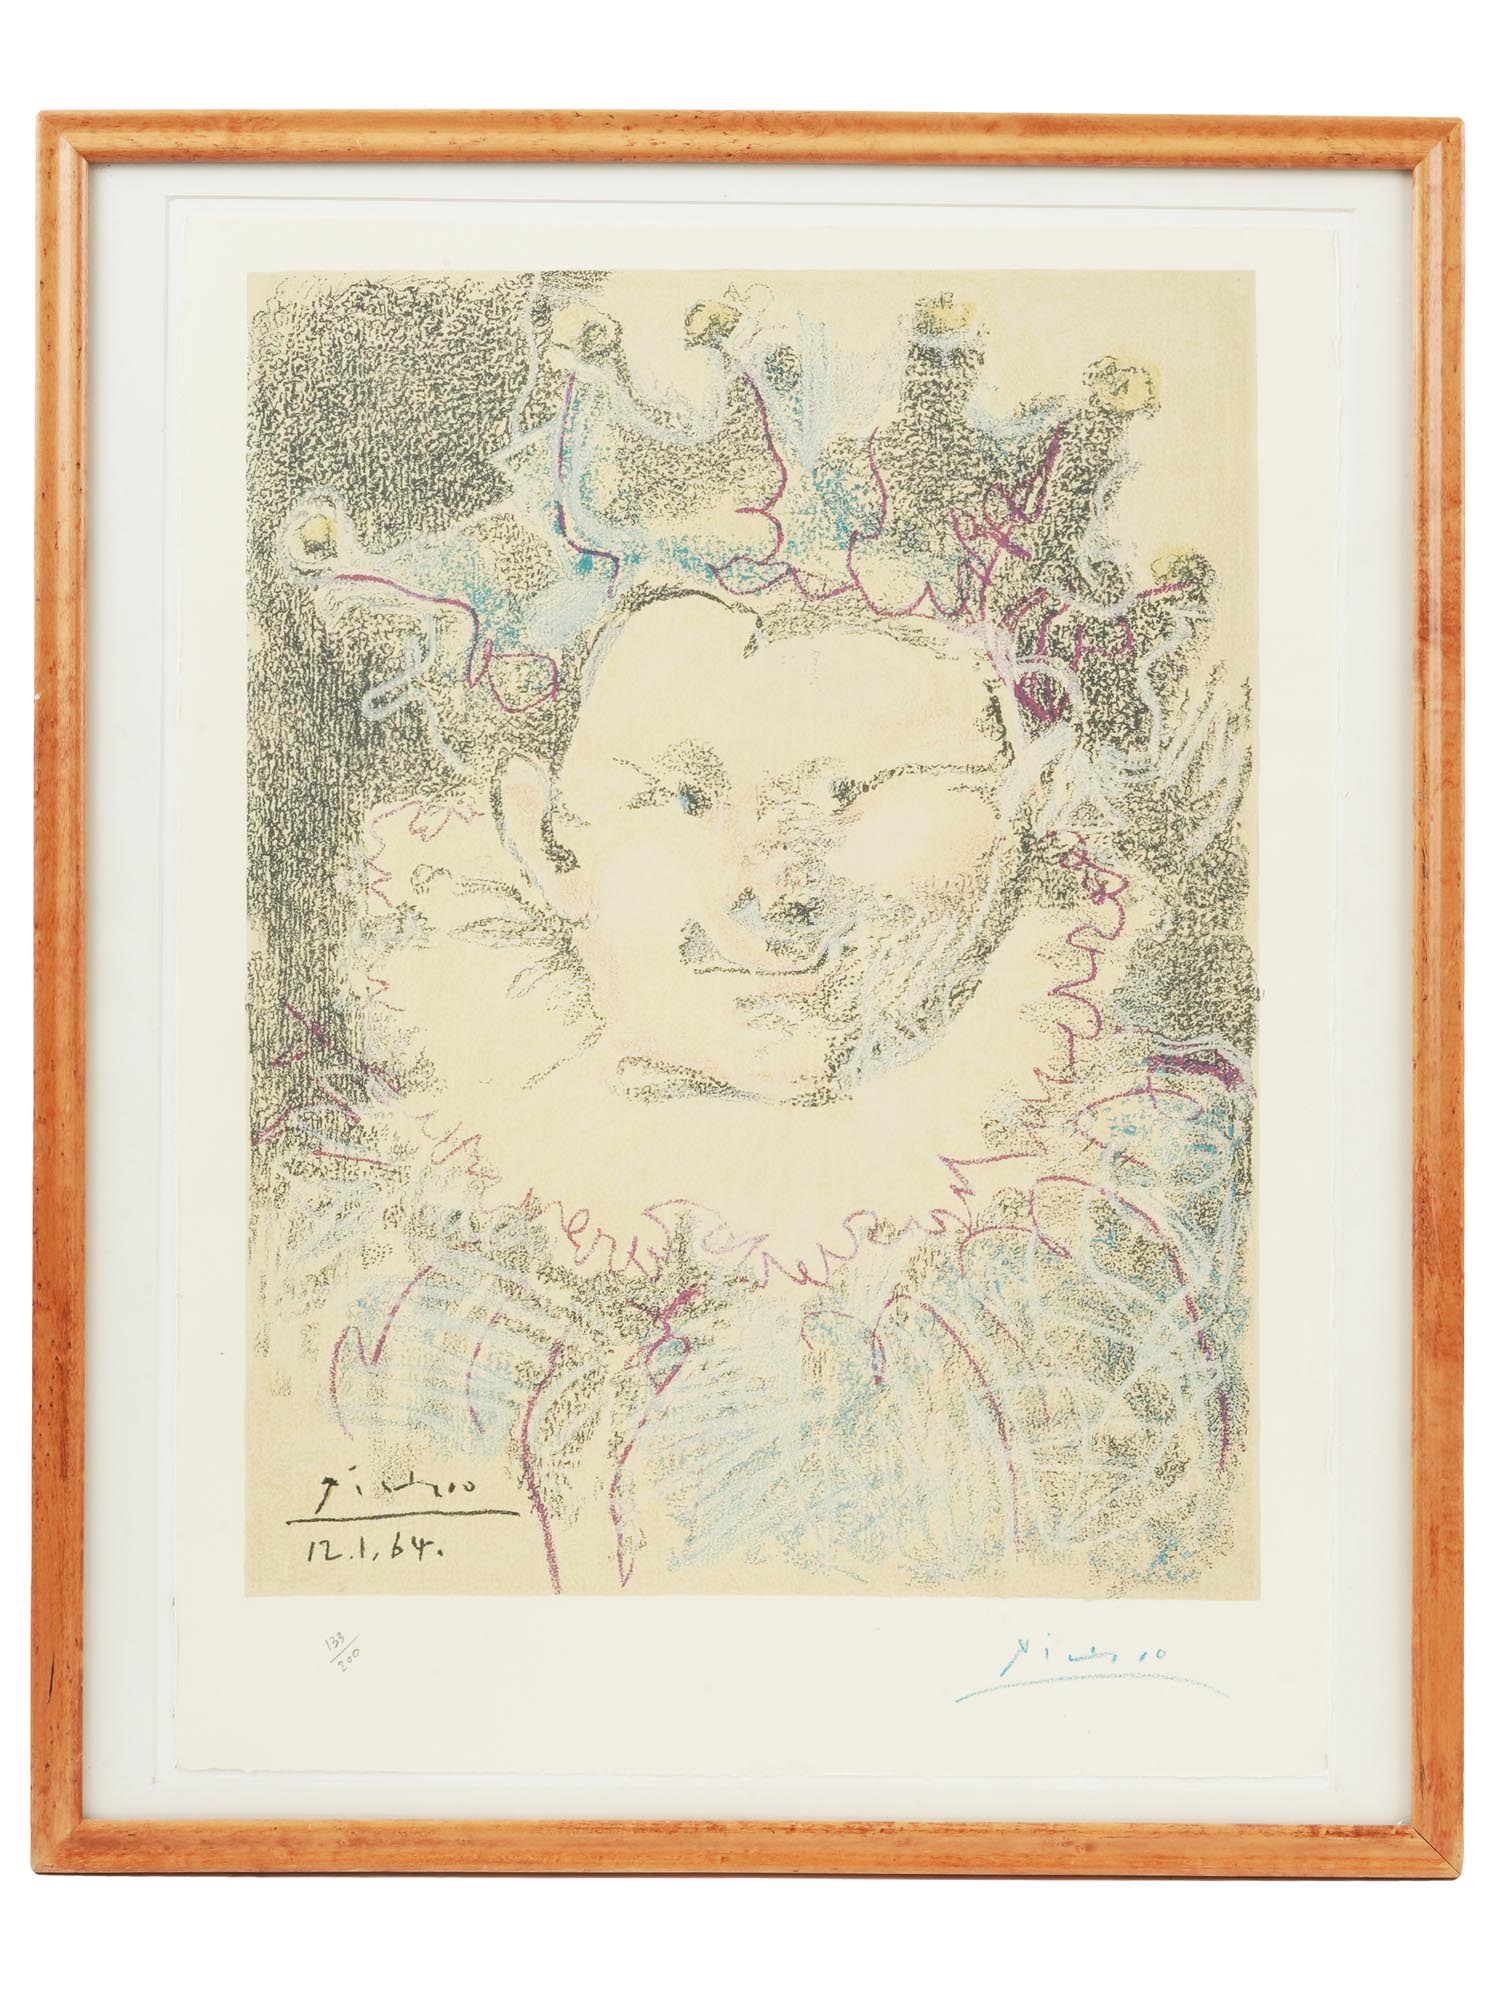 LIMITED ED SPANISH LITHOGRAPH AFTER PABLO PICASSO